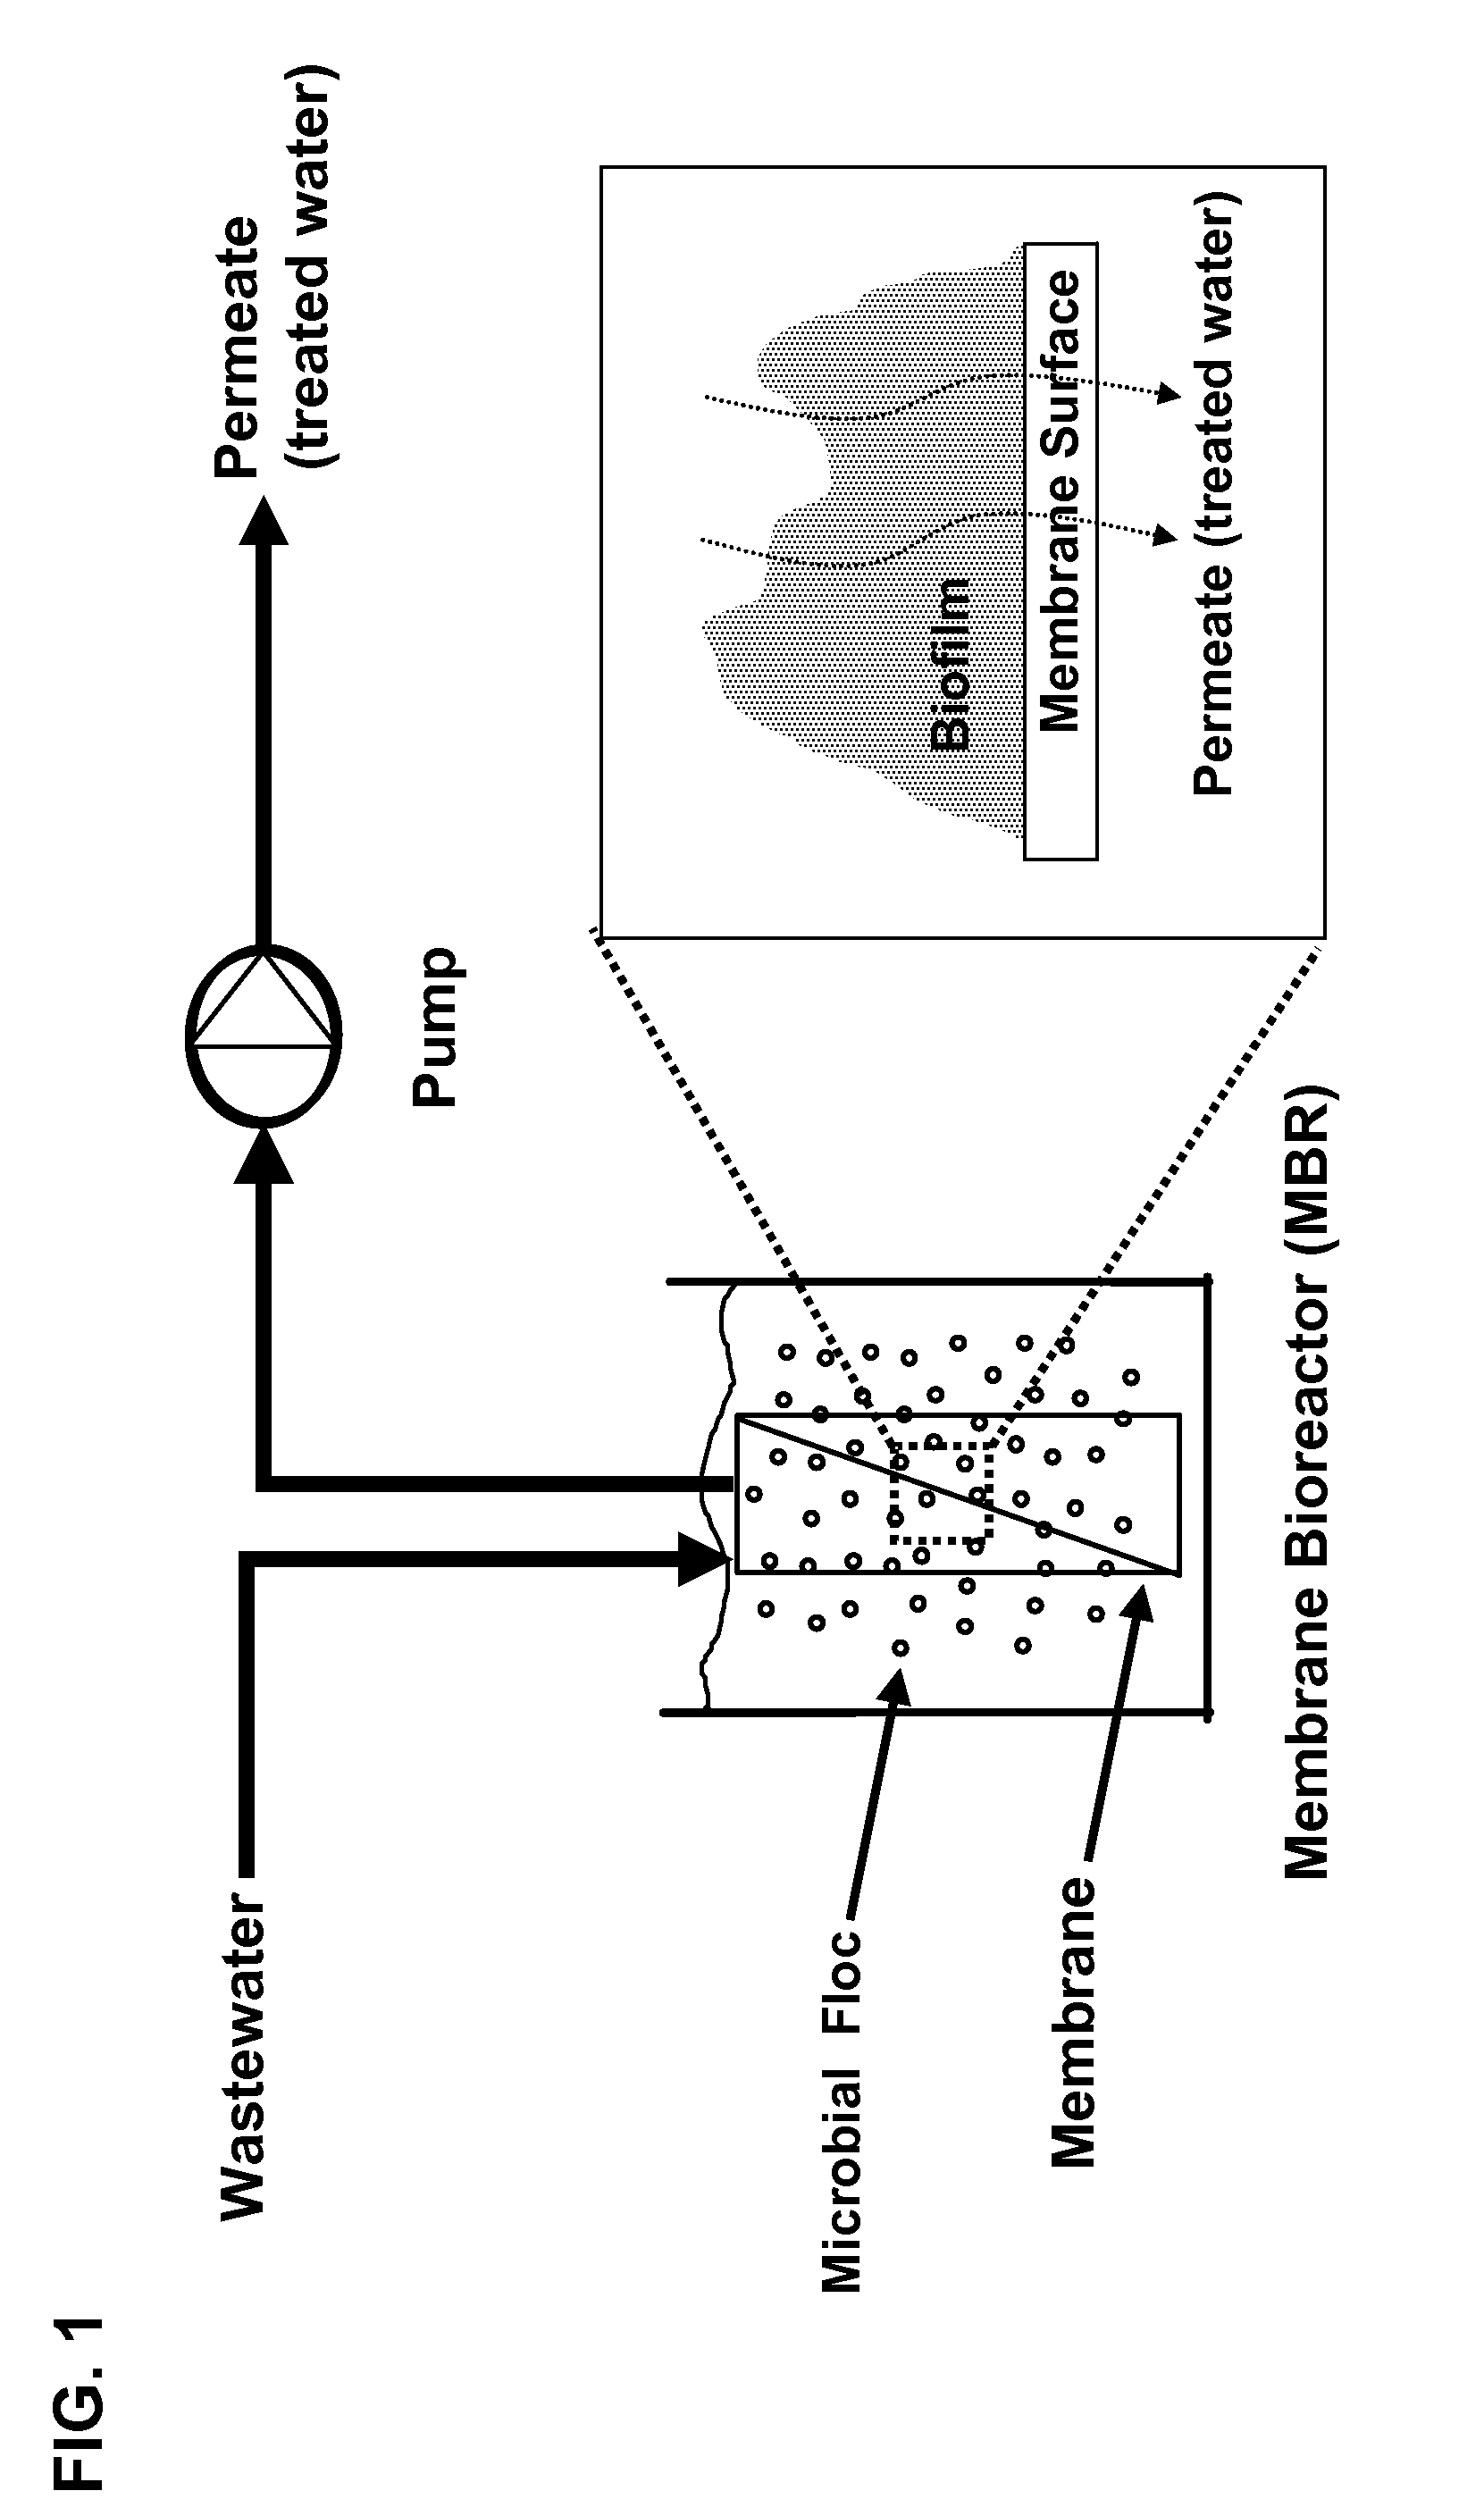 Magnetic carrier and membrane bioreactor comprising enzyme for inhibiting biofilm formation